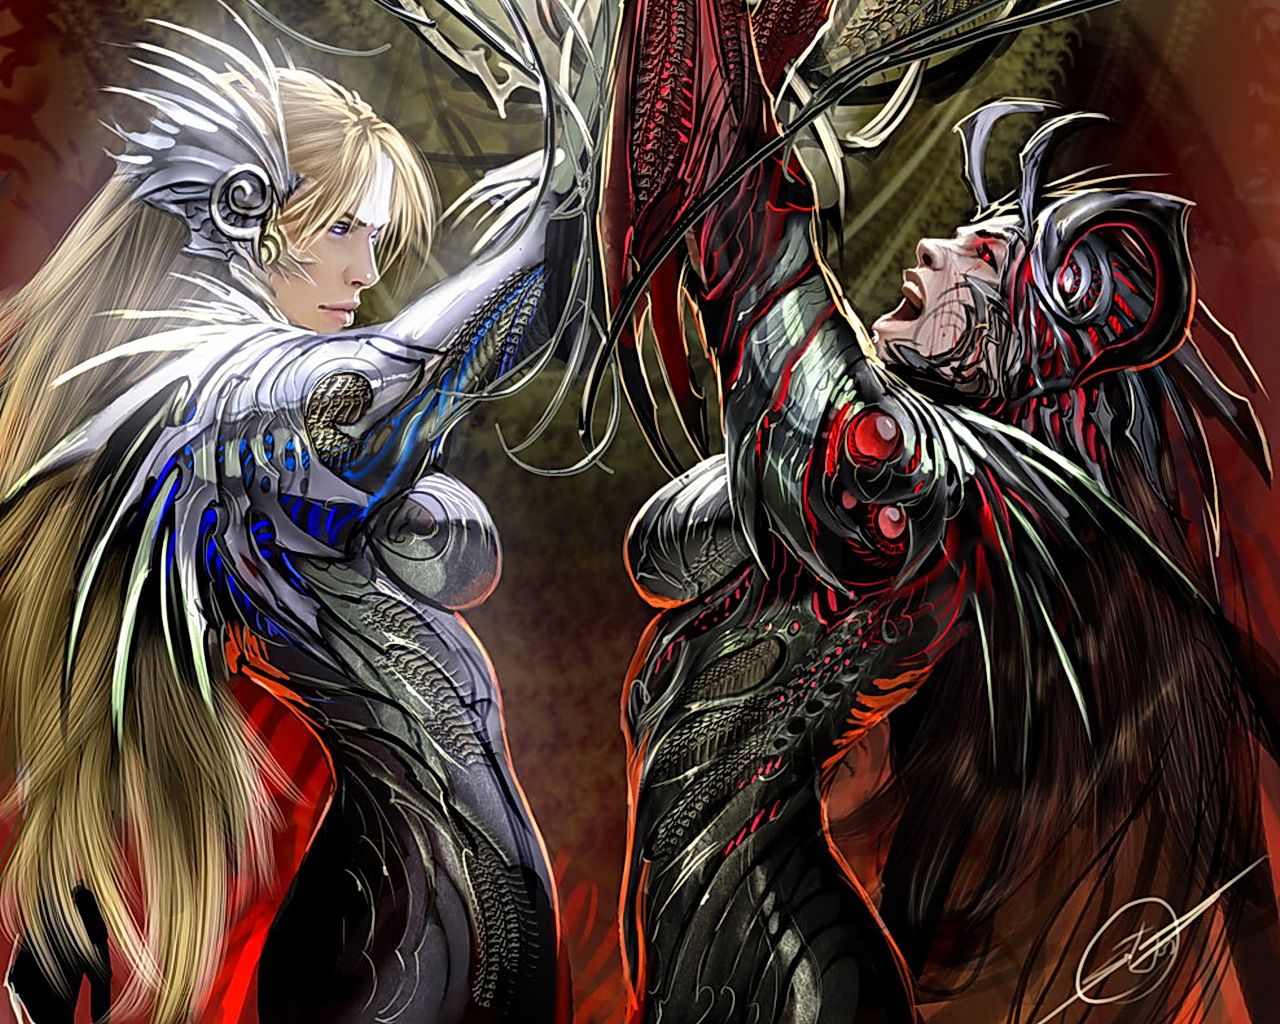   definition wallpapercomphotoanime witchblade wallpapers22html 1280x1024